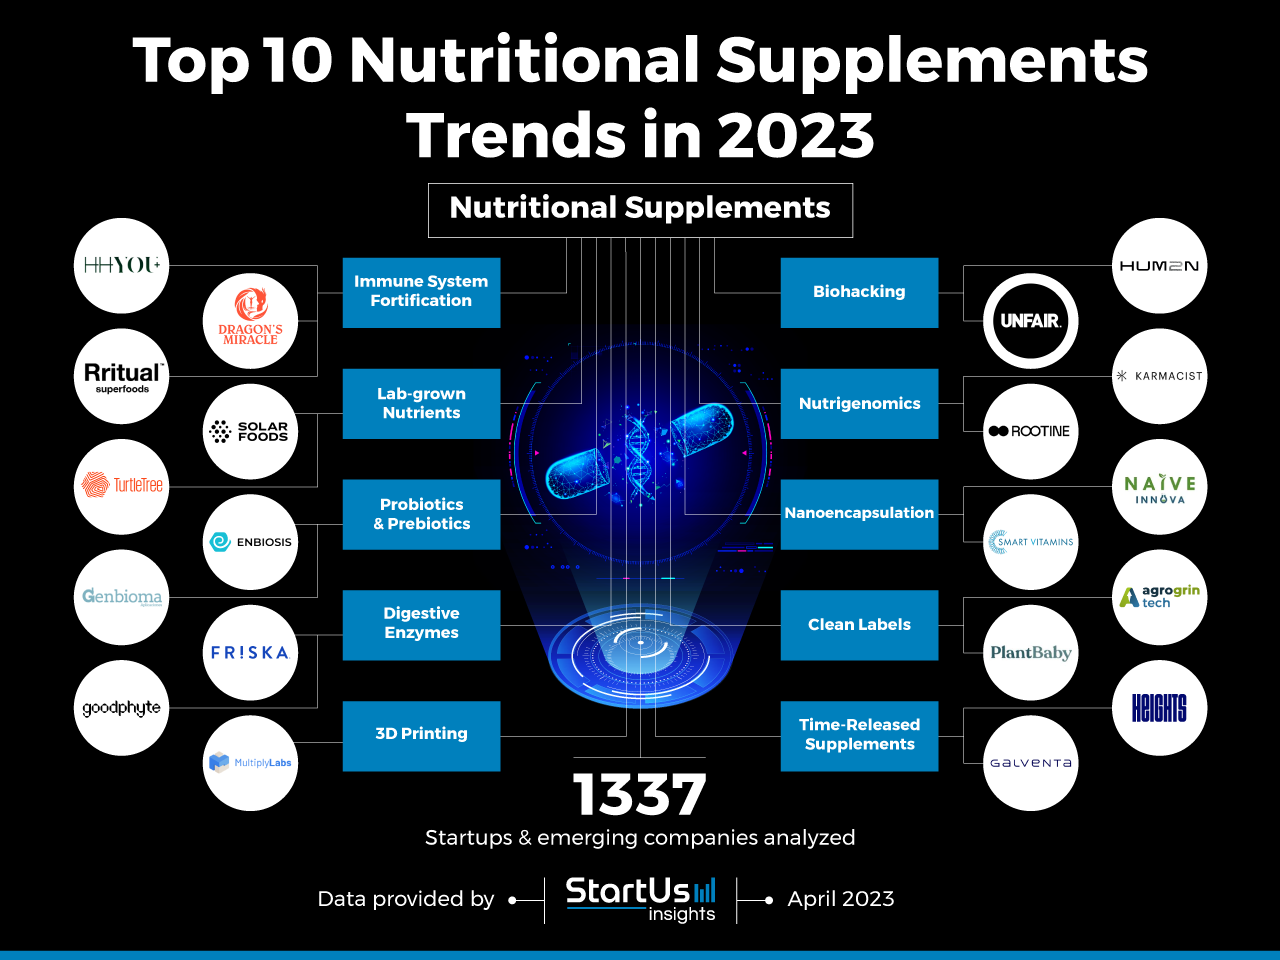 Discover the Top 10 Nutritional Supplements Trends in 2023